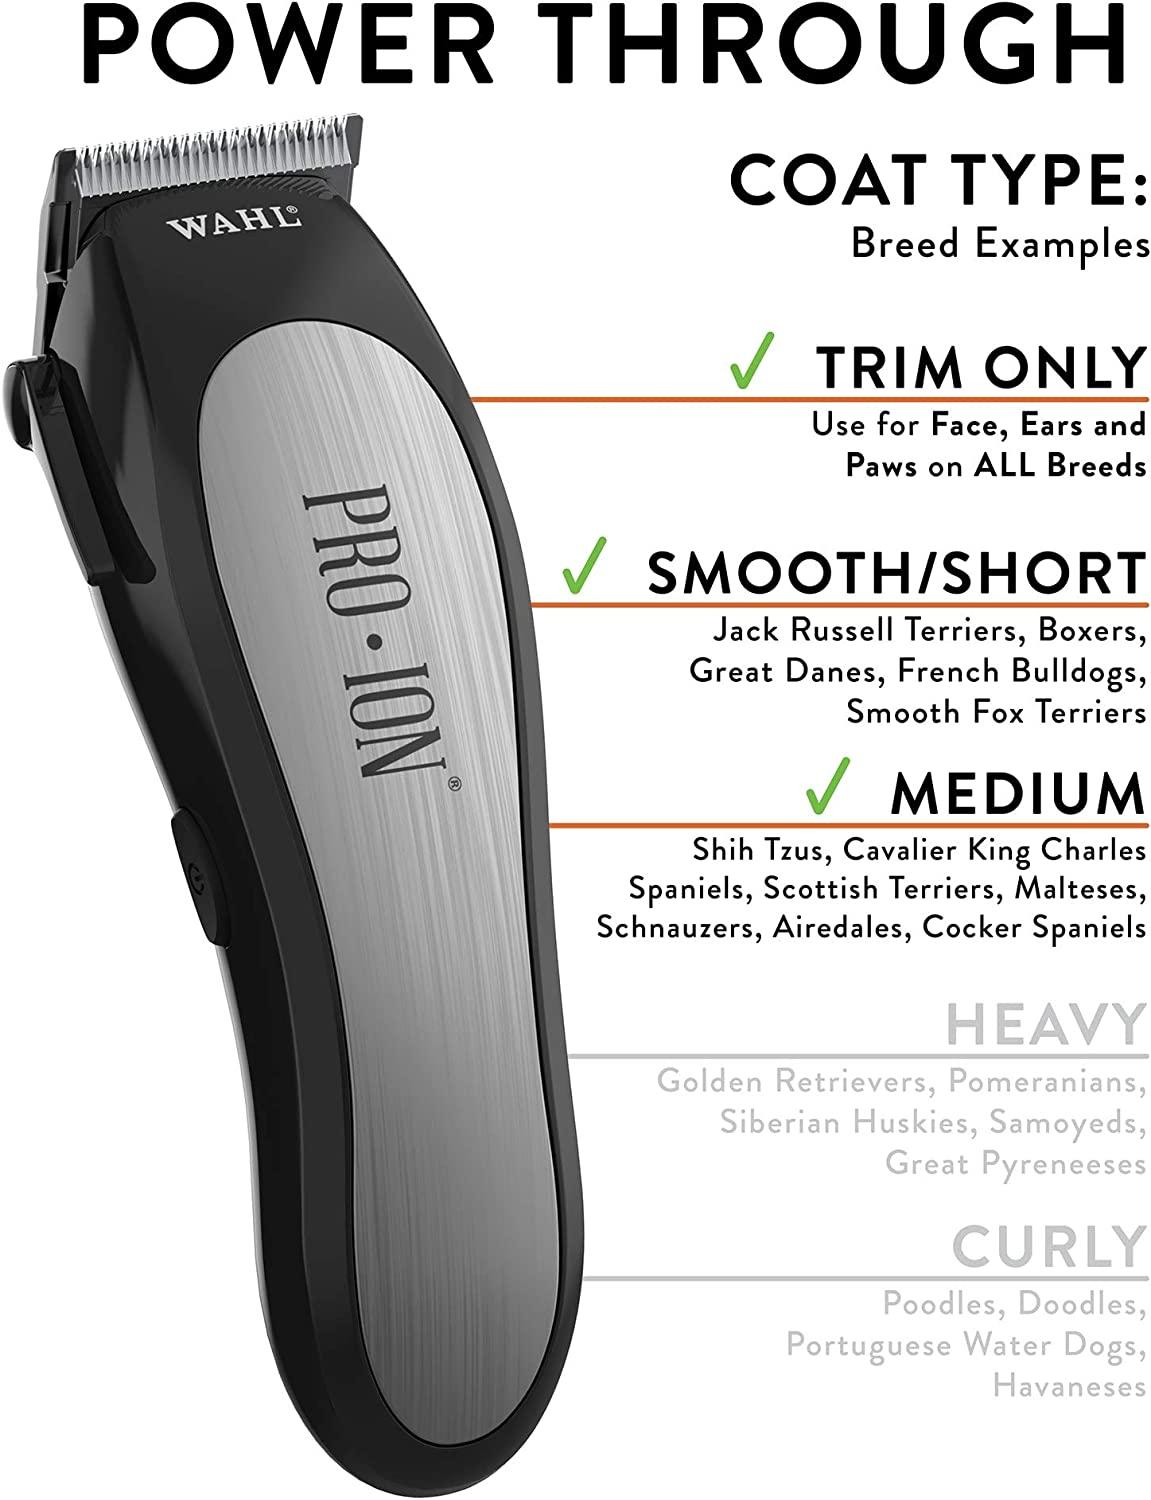 Wahl Professional Animal Pro Ion Pet, Dog, and Cat Cordless Clipper Kit  (#9705)